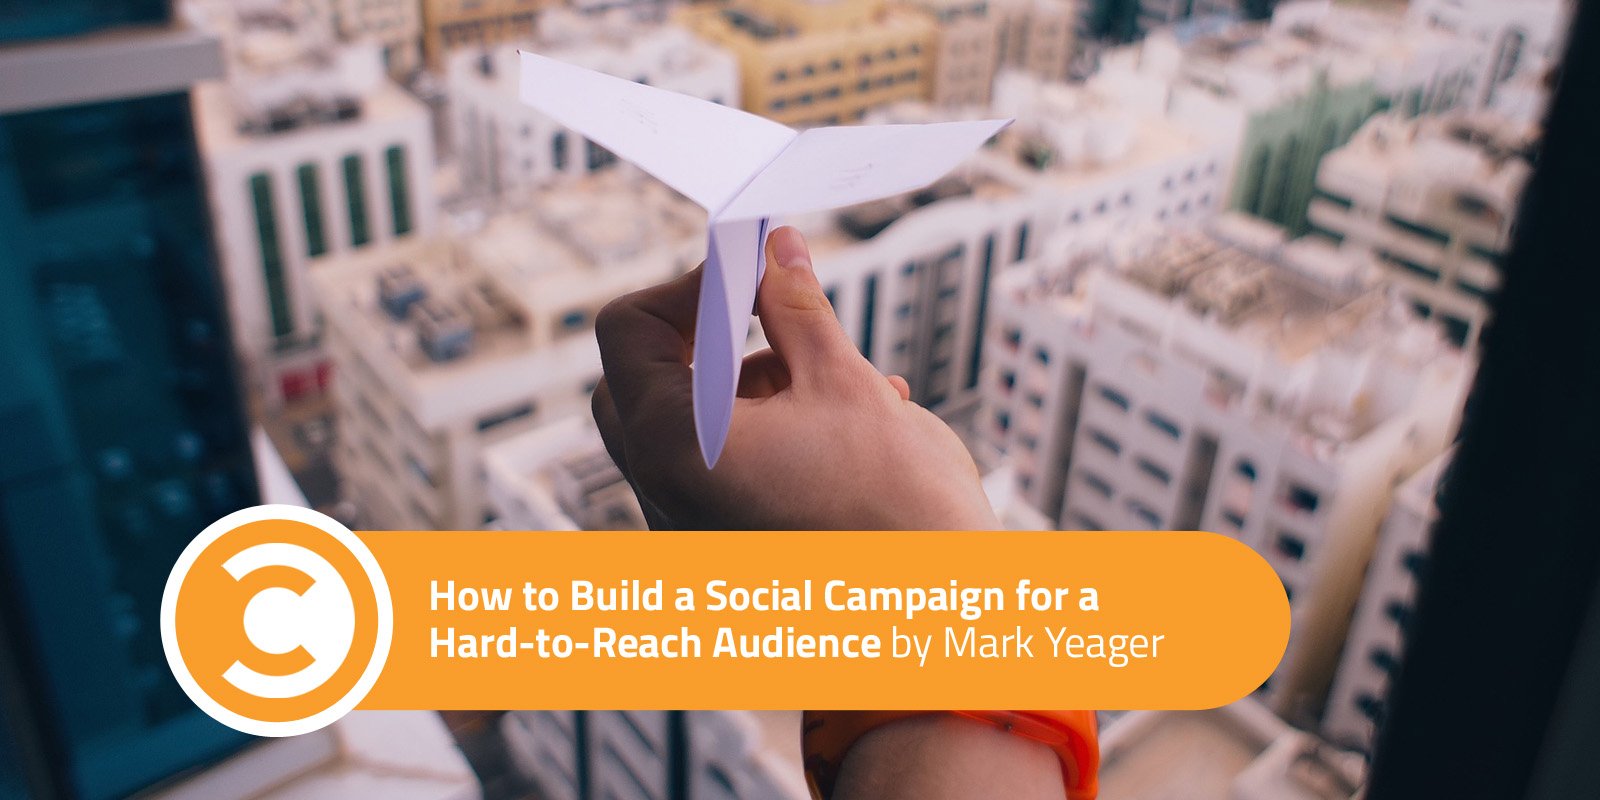 How to Build a Social Campaign for a Hard-to-Reach Audience